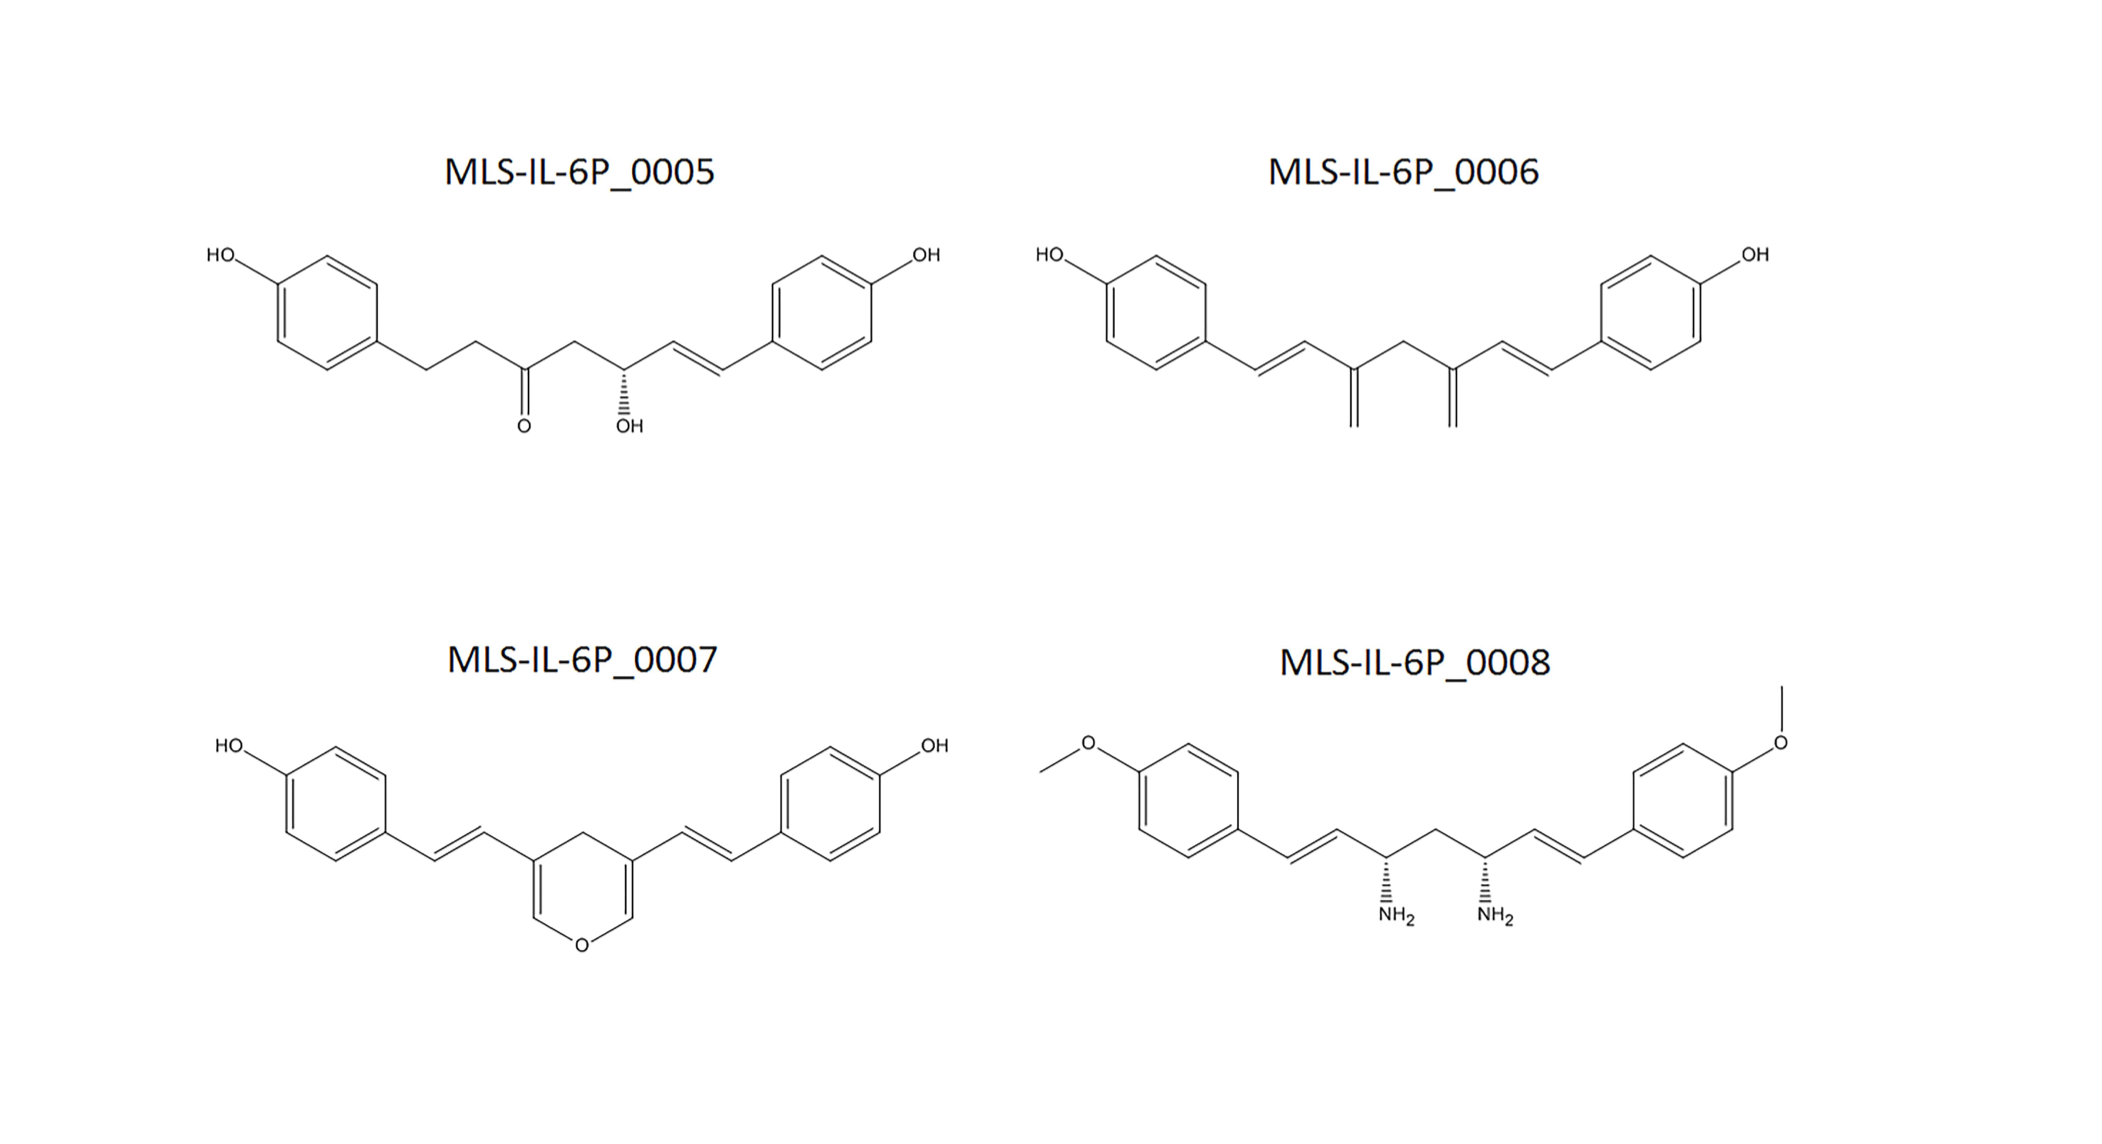 M-Life™ Novel IL-6 Molecules and Efficacy/Toxicity Data